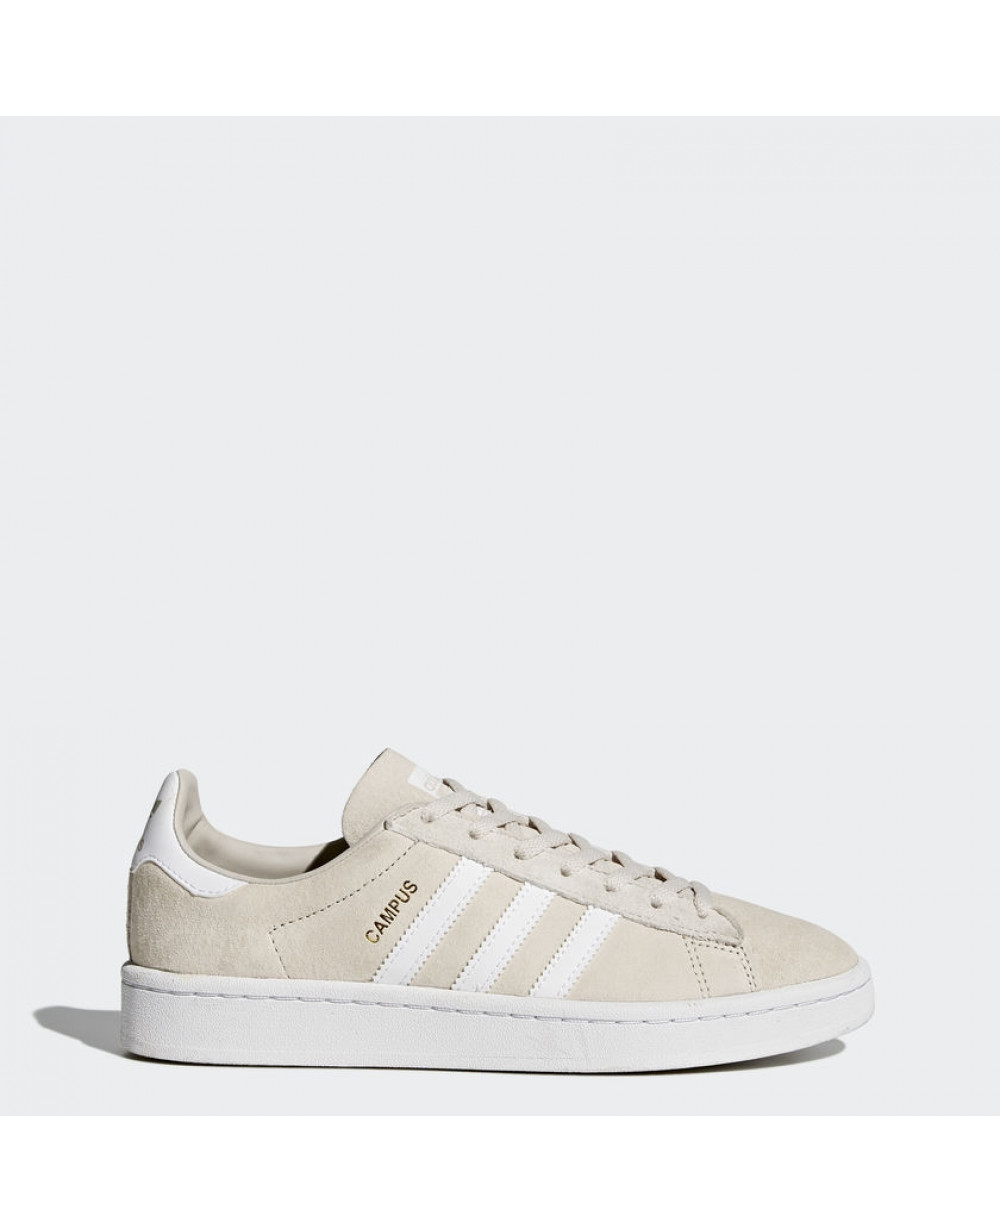 gray lease hatch Adidas Campus Sneaker For Women BY9846